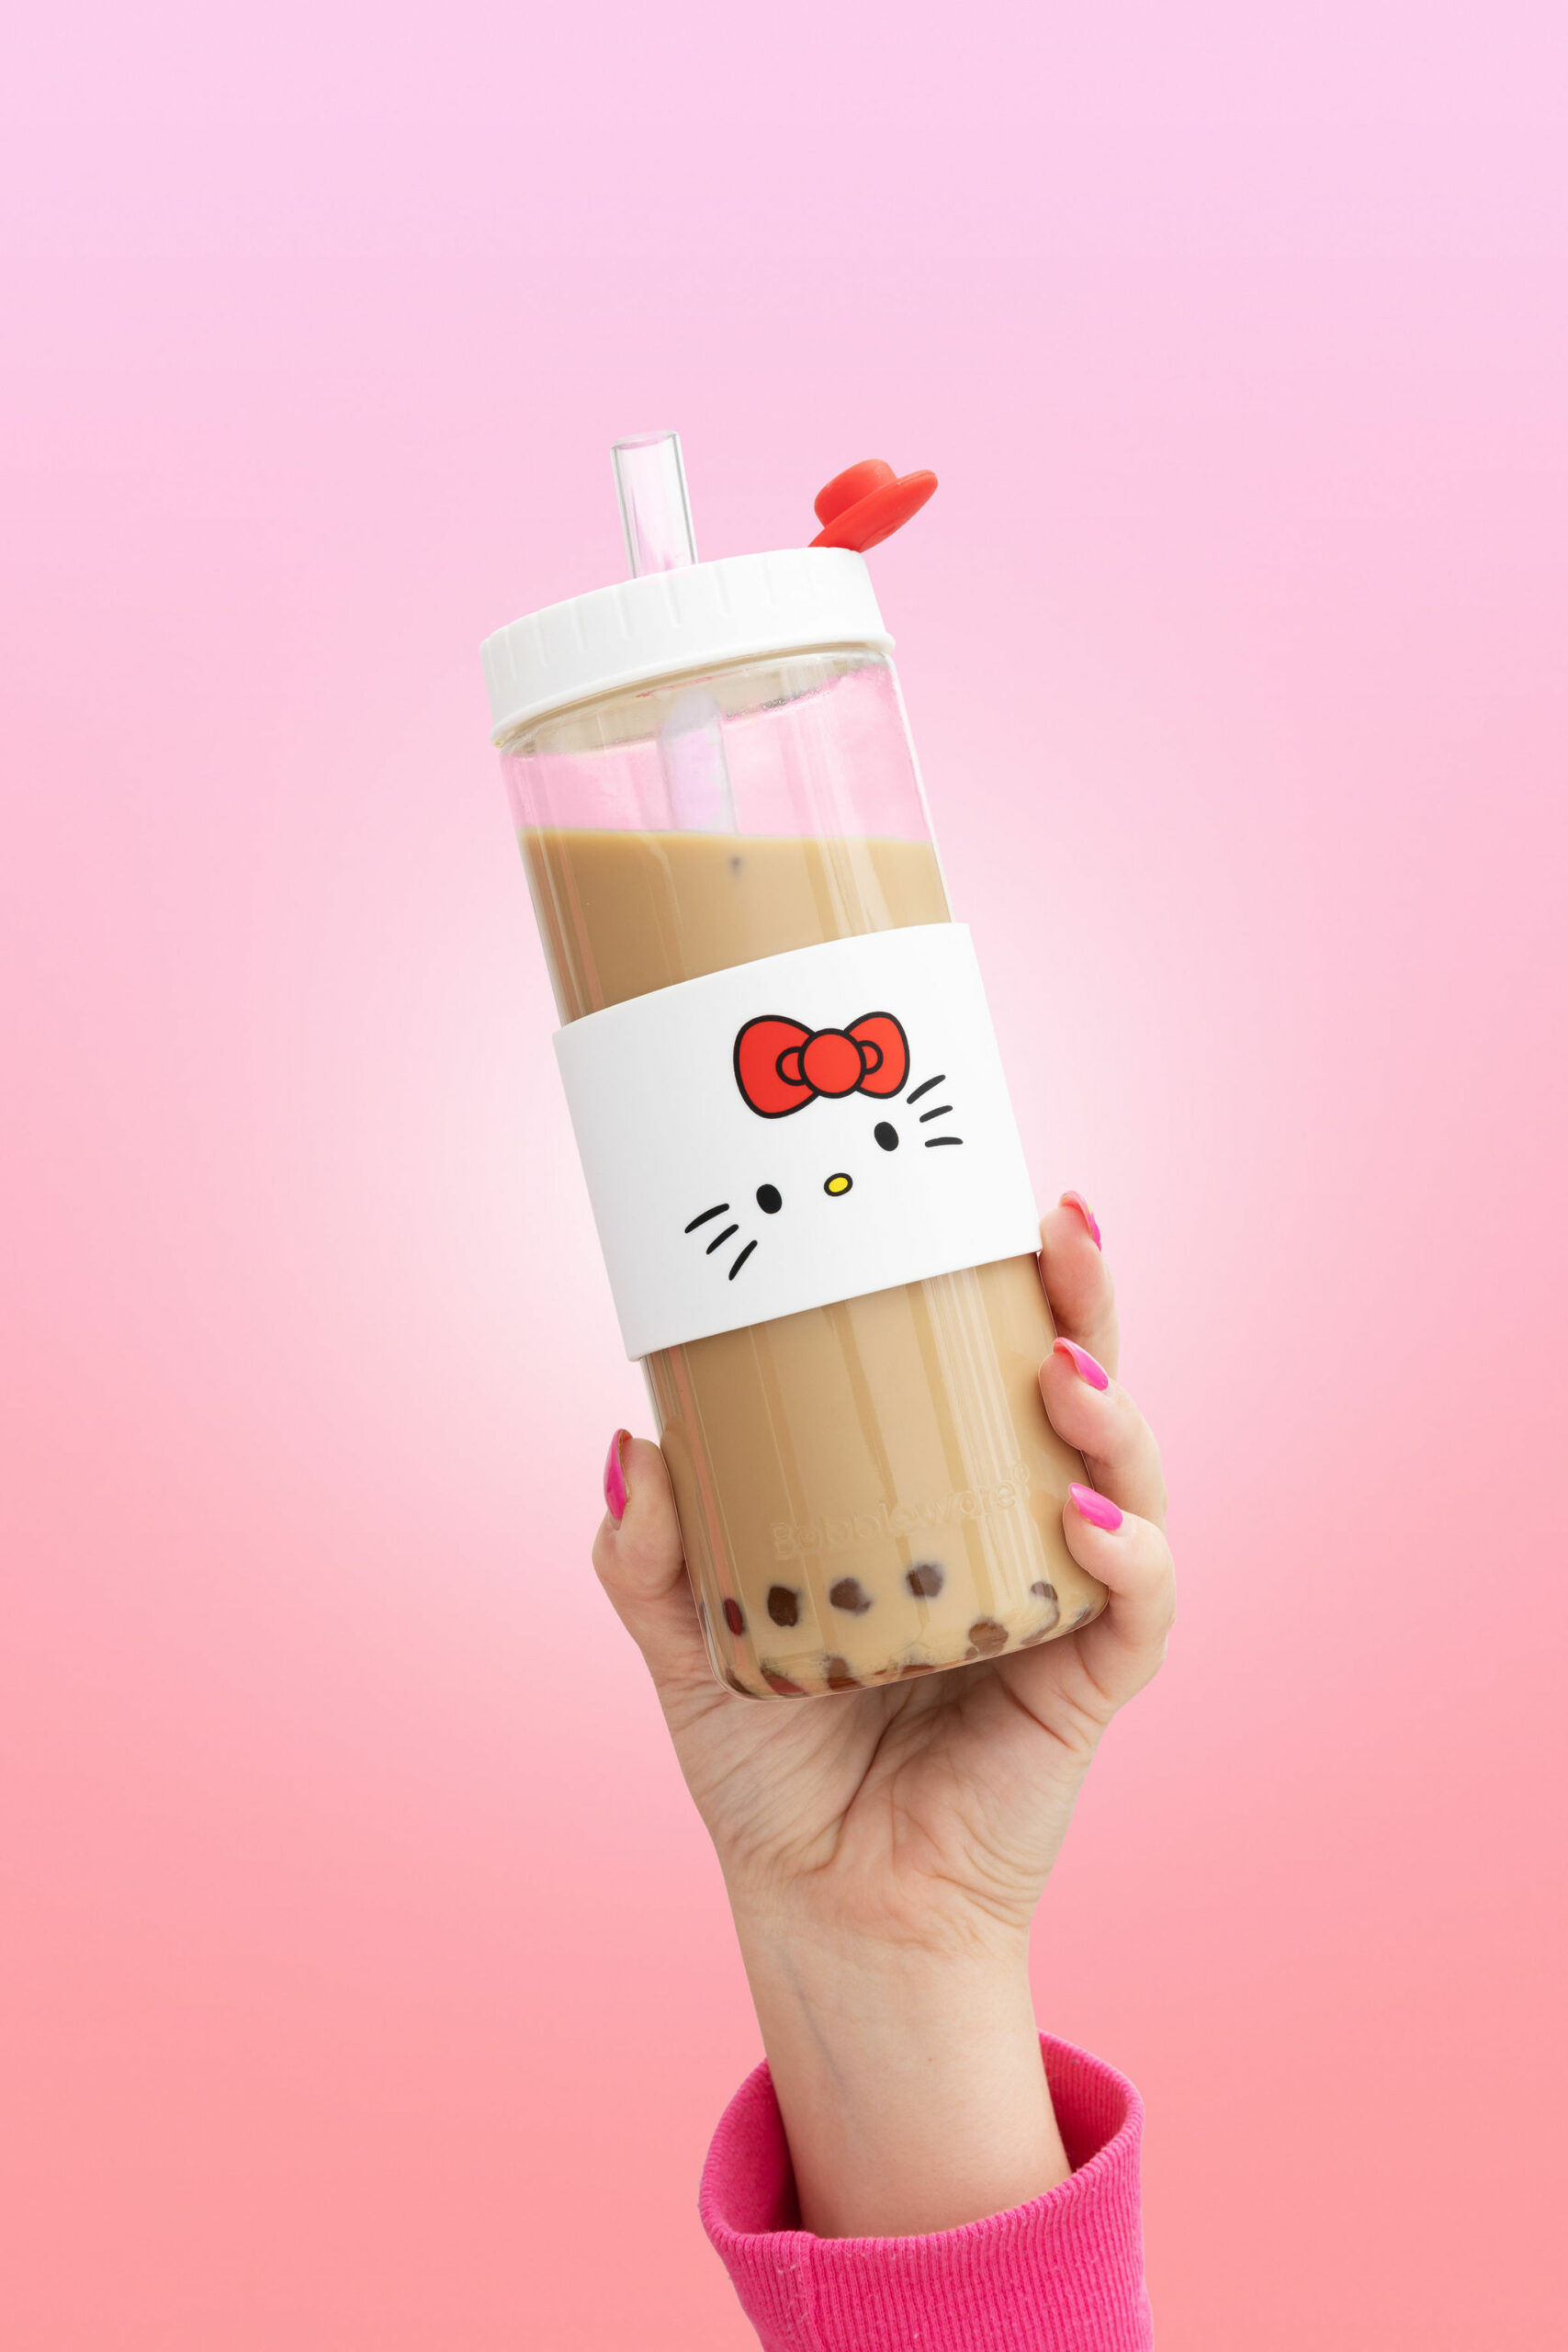 Bubble Tea Product Photography for reusable drinkware brand Bobbleware. Colourful Content styled by Colourpop Studio